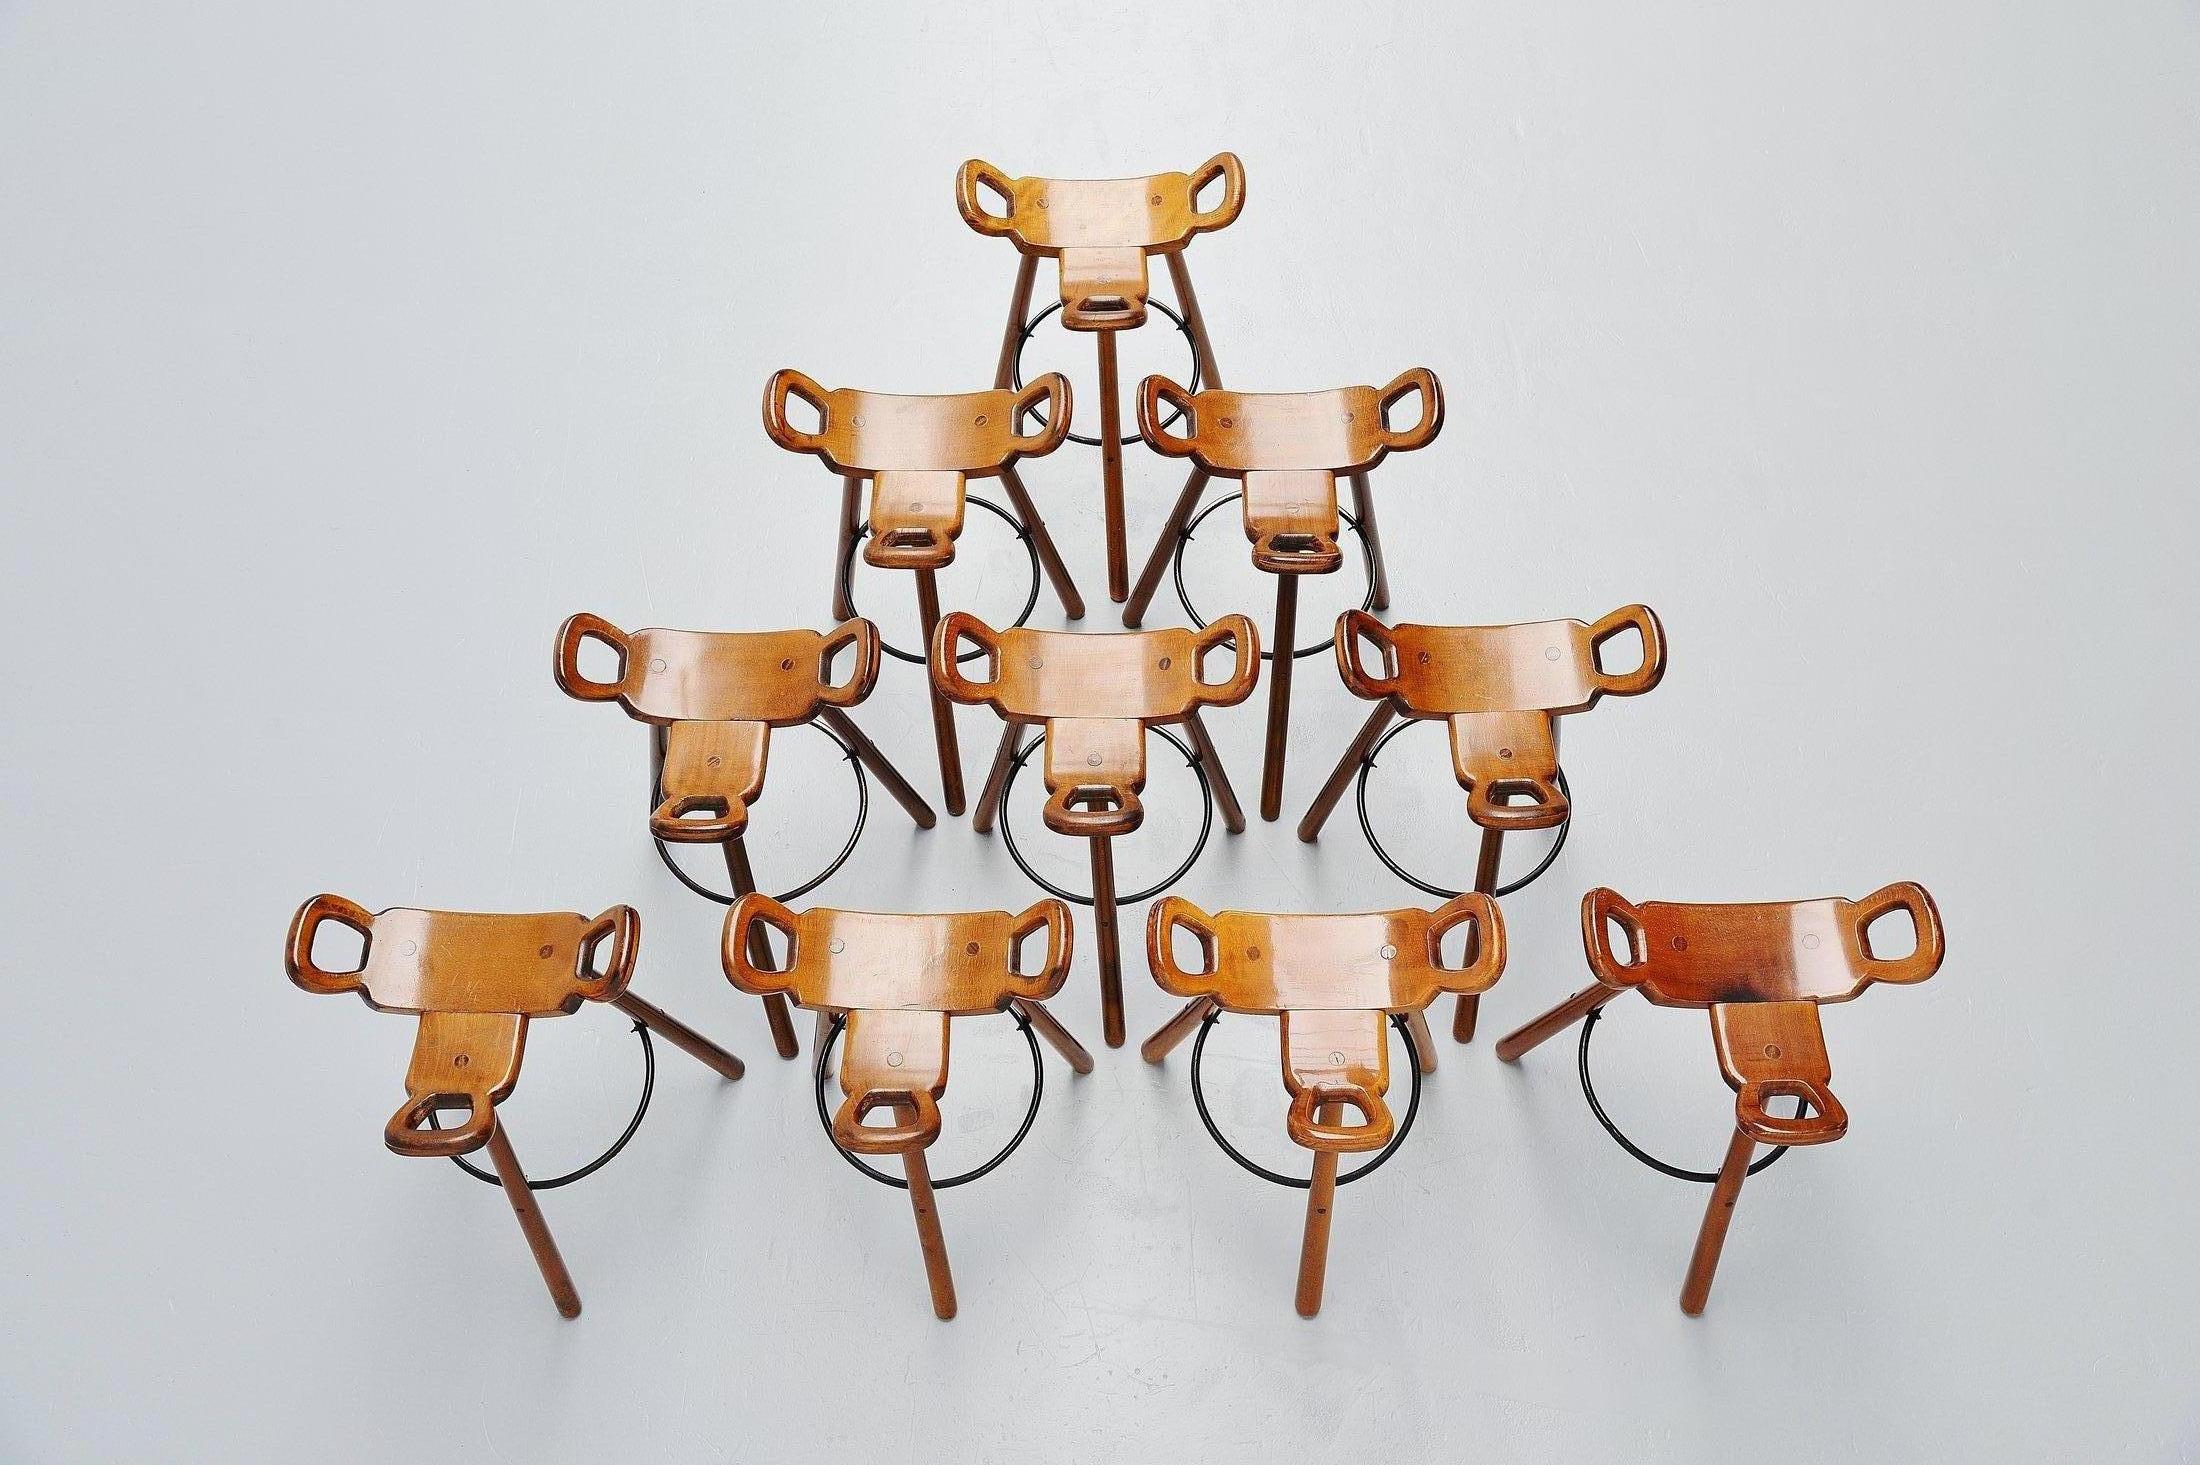 Very nice and large set of 10 bar stools designed by Carl Malmsten, Sweden 1950. These stools are very nicely shaped and made of solid birch wood, dark stained. The stools have a black metal supporting footrest ring. These stools are in original